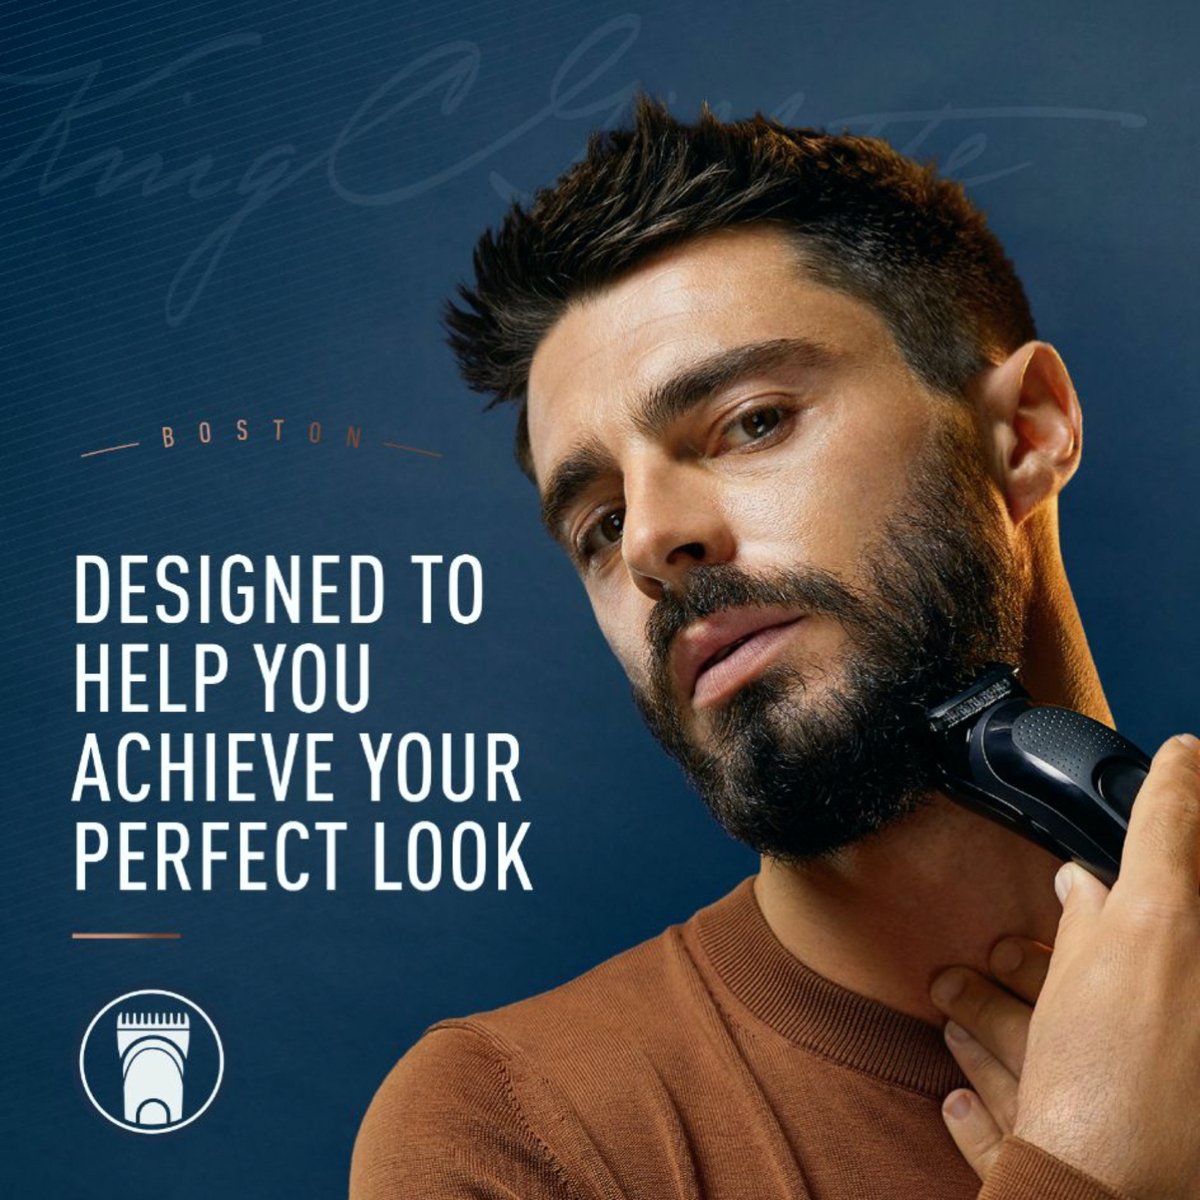 King C. Gillette Cordless Men’s Beard Trimmer Kit with Lifetime Sharp Blades and 3 Interchangeable Combs